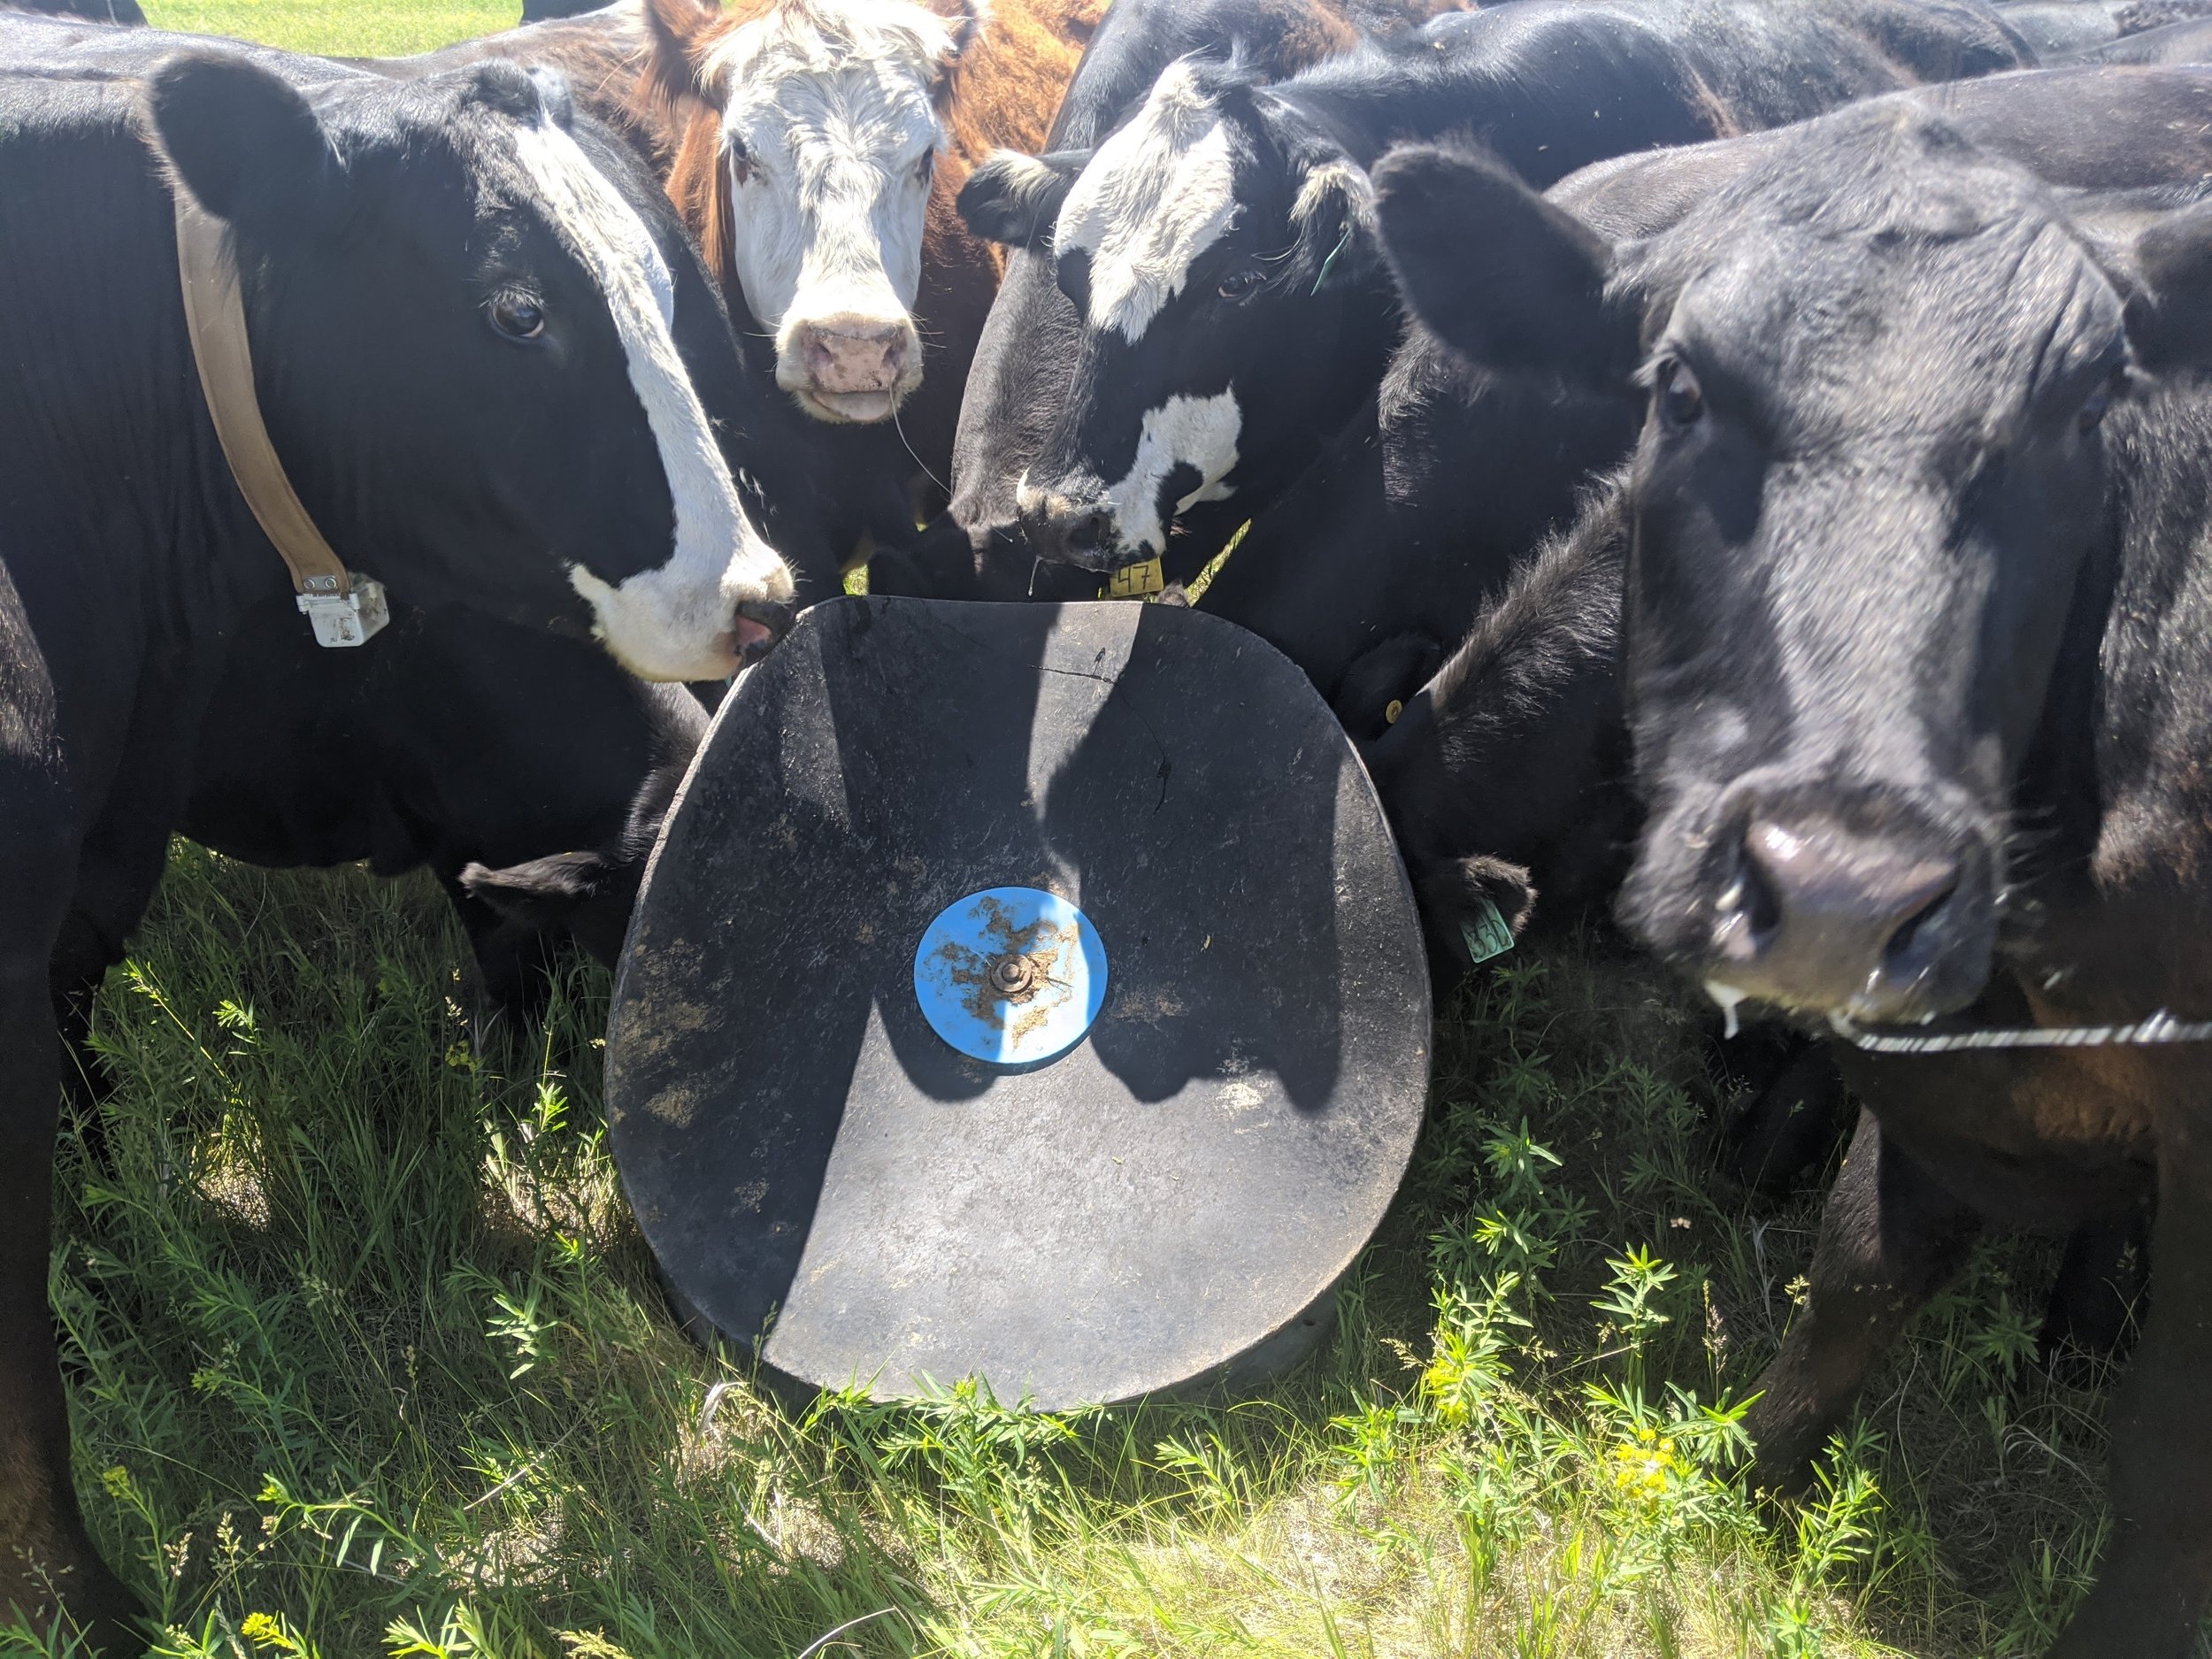 Mineral feeder placement used as a tool for cattle distribution